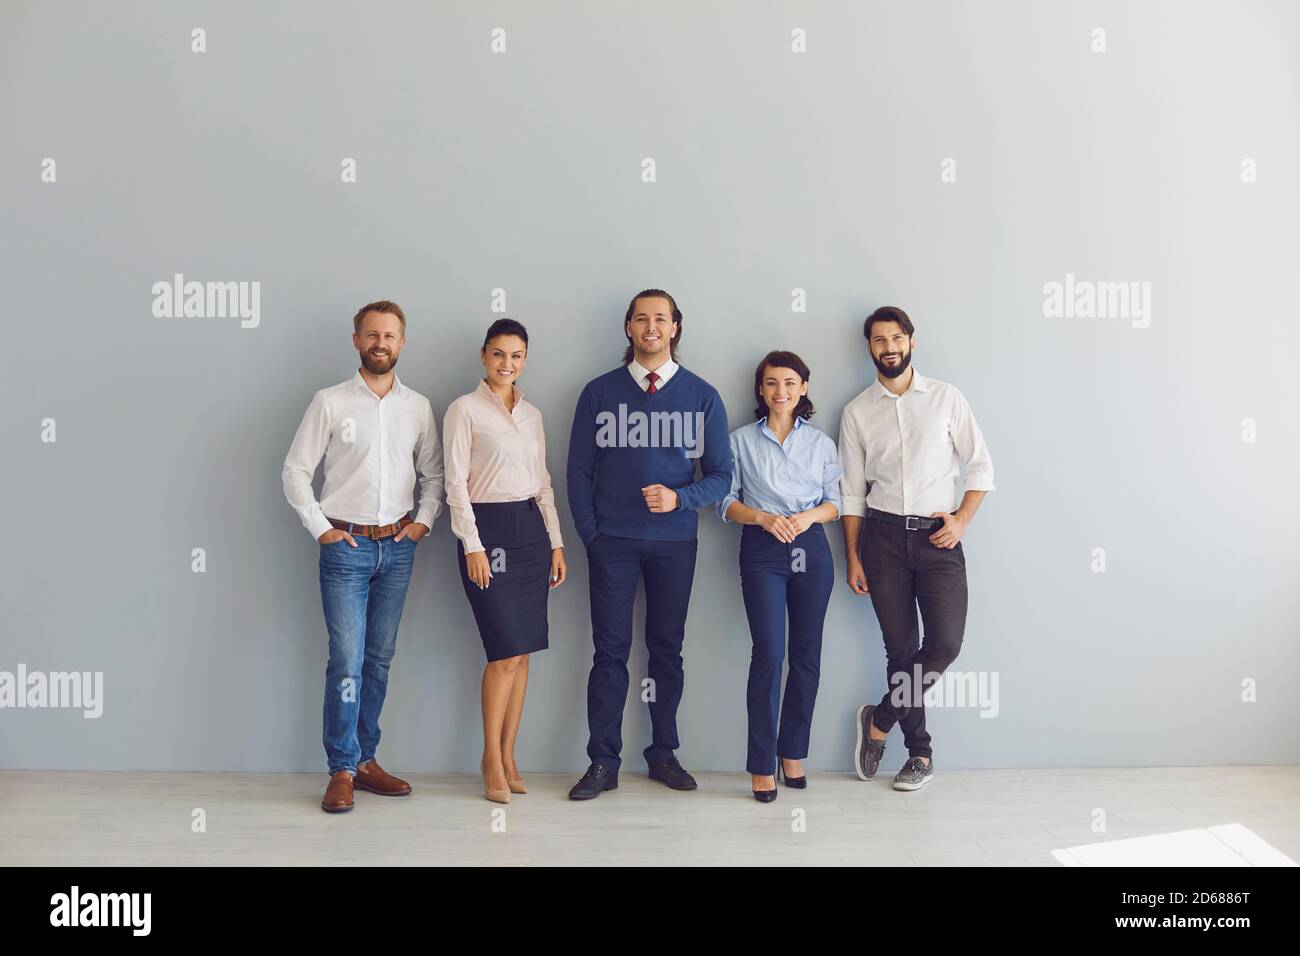 Group portrait of happy businesspeople standing near office wall looking at camera Stock Photo